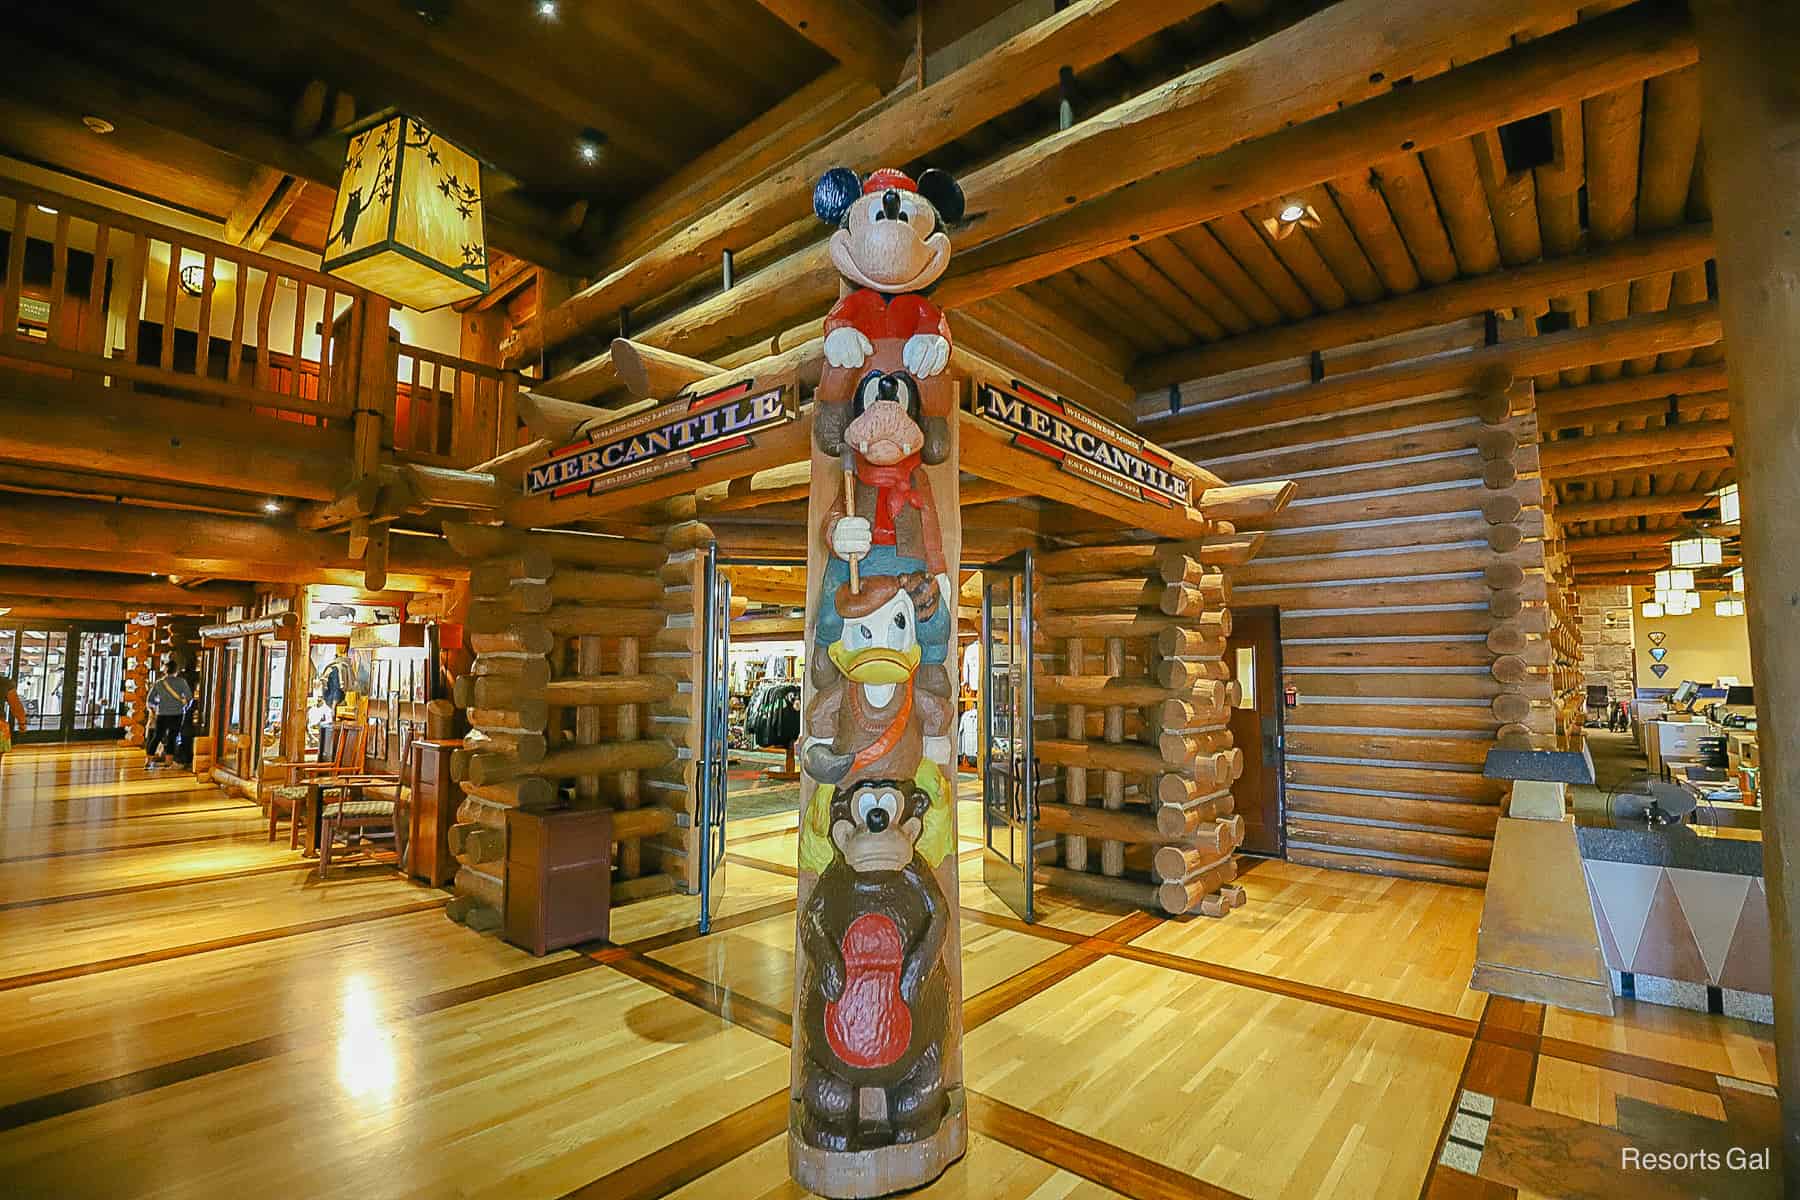 the totem pole with Mickey, Goofy, Donald, and Humphrey the Bear in front of Wilderness Lodge Mercantile 